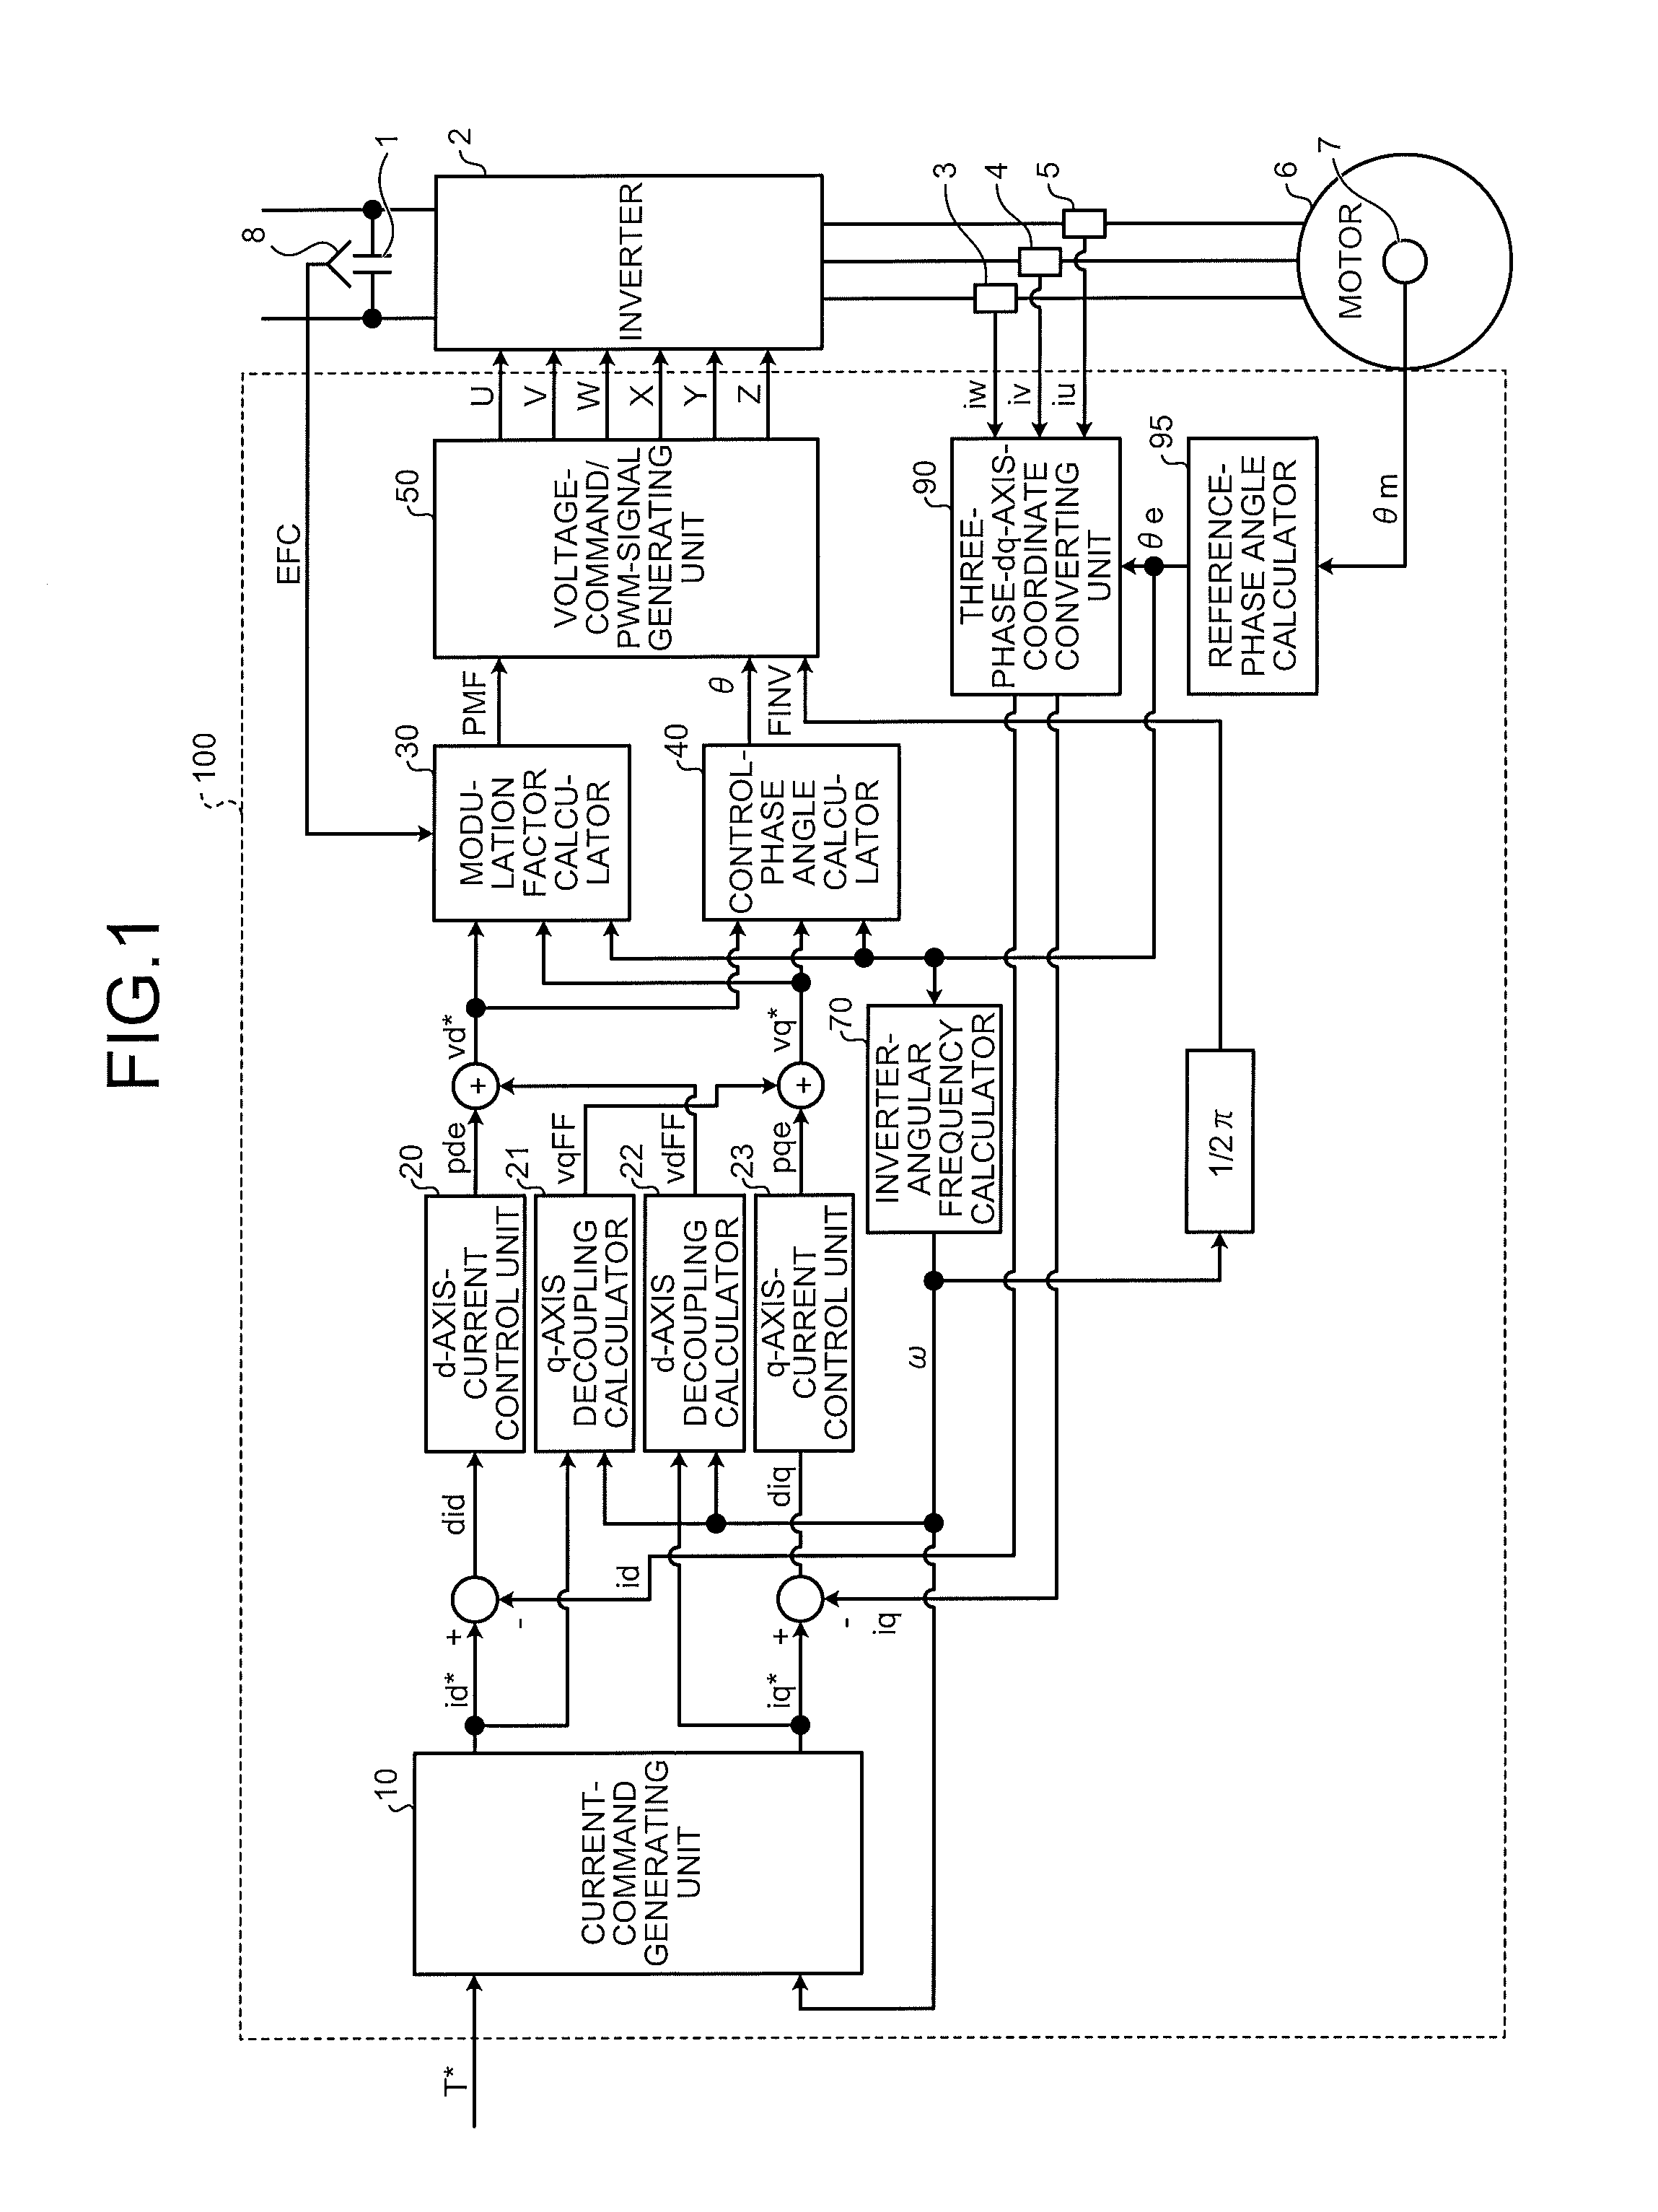 Controller of motor preventing an increase in inverter loss